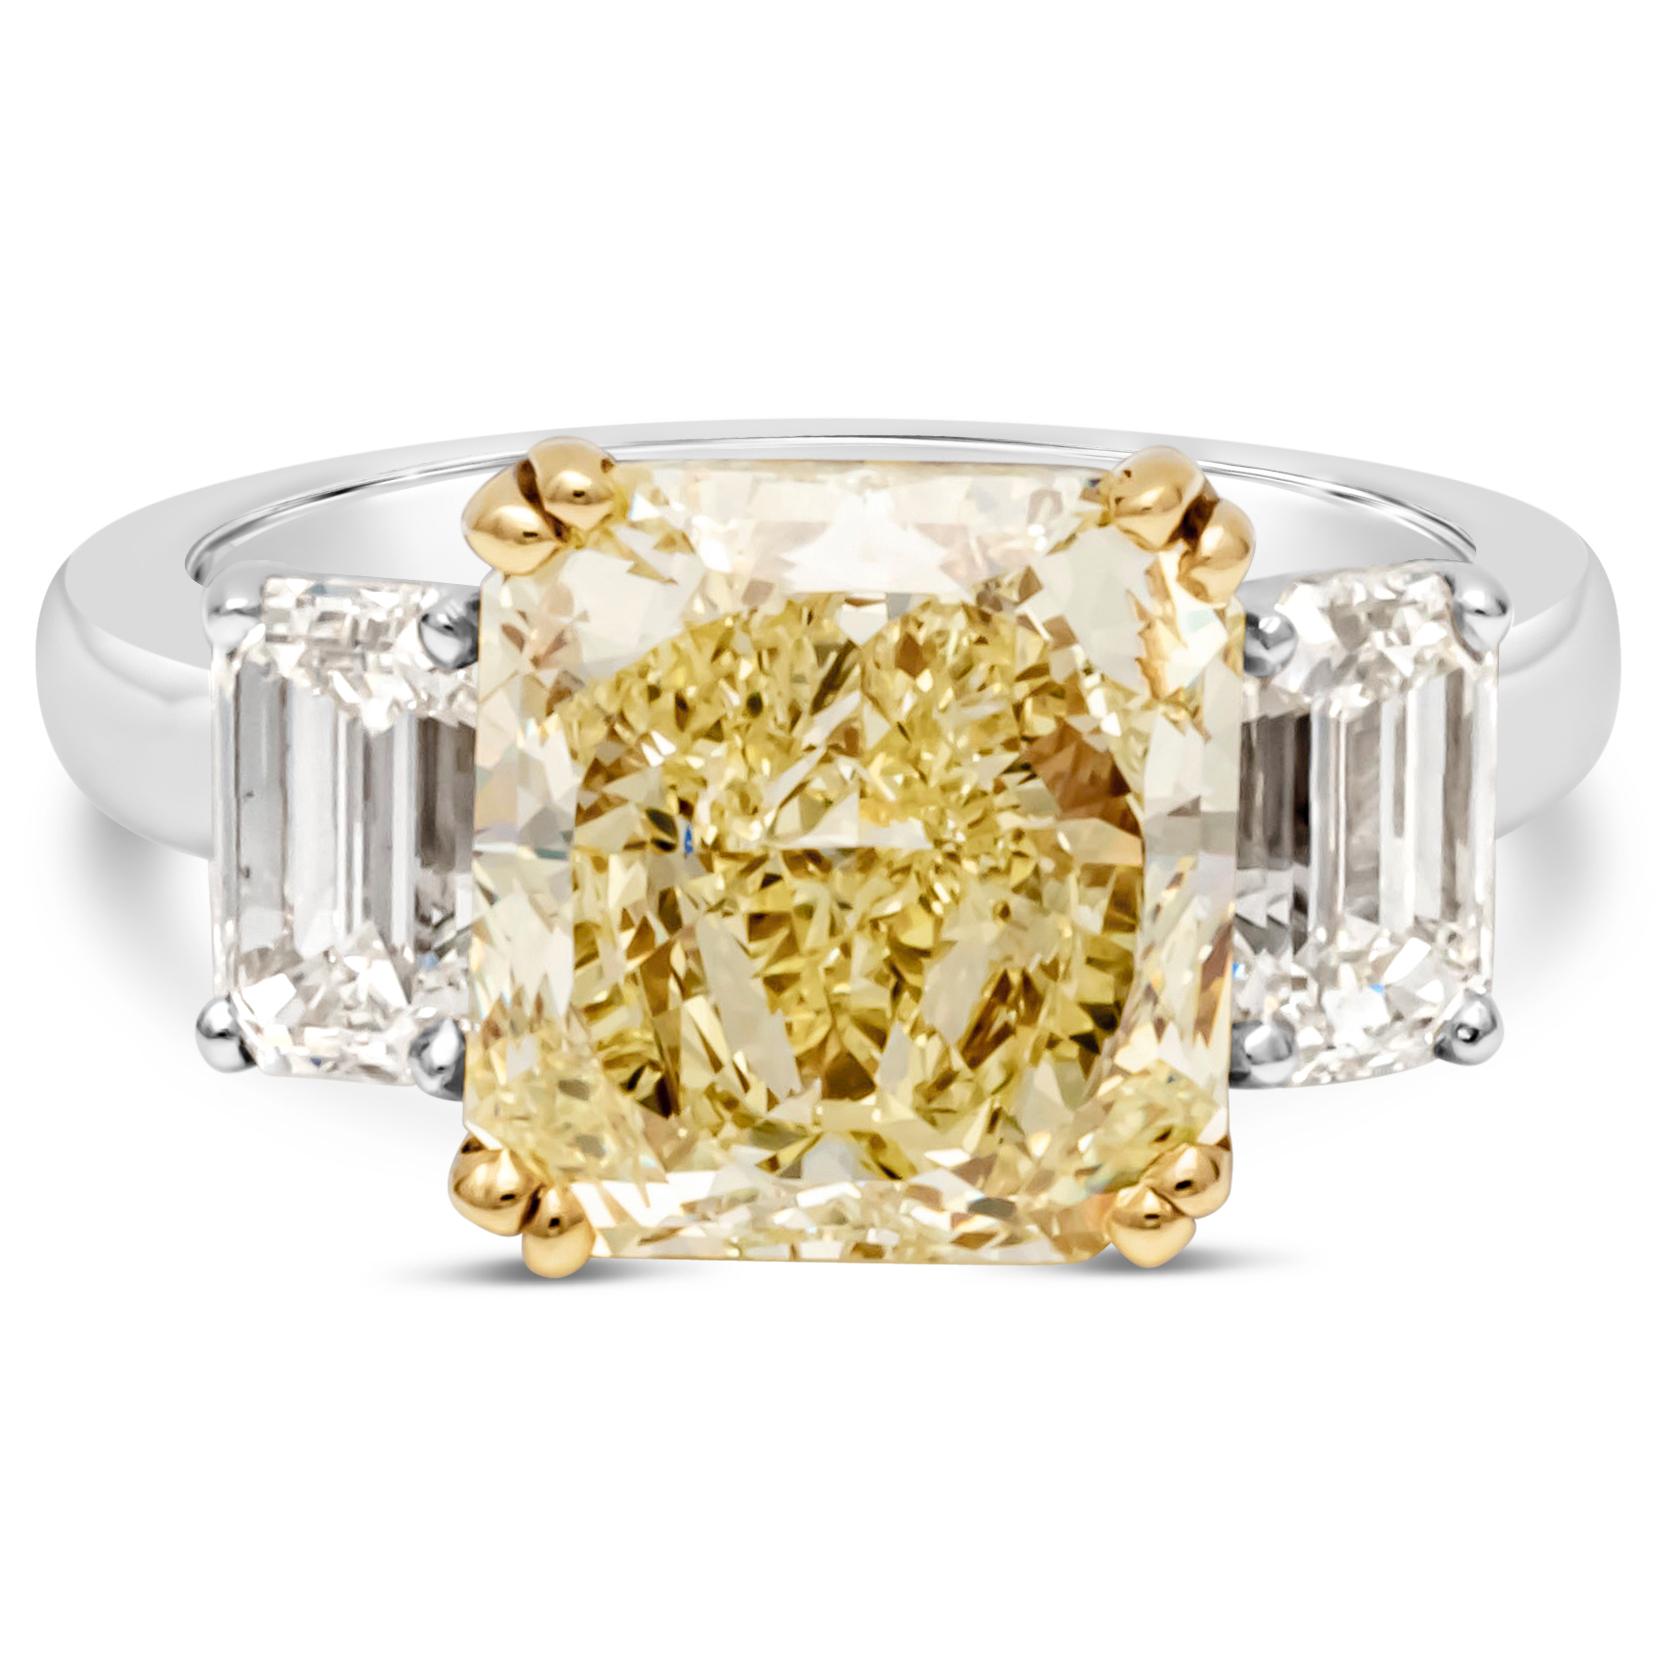 A color-rich three-stone engagement ring showcasing a 4.68 carats radiant cut yellow diamond, certified by GIA as Fancy Intense Yellow color and VS2 in clarity. Set in a timeless eight prong basket setting made in 18K yellow gold. Flanking the